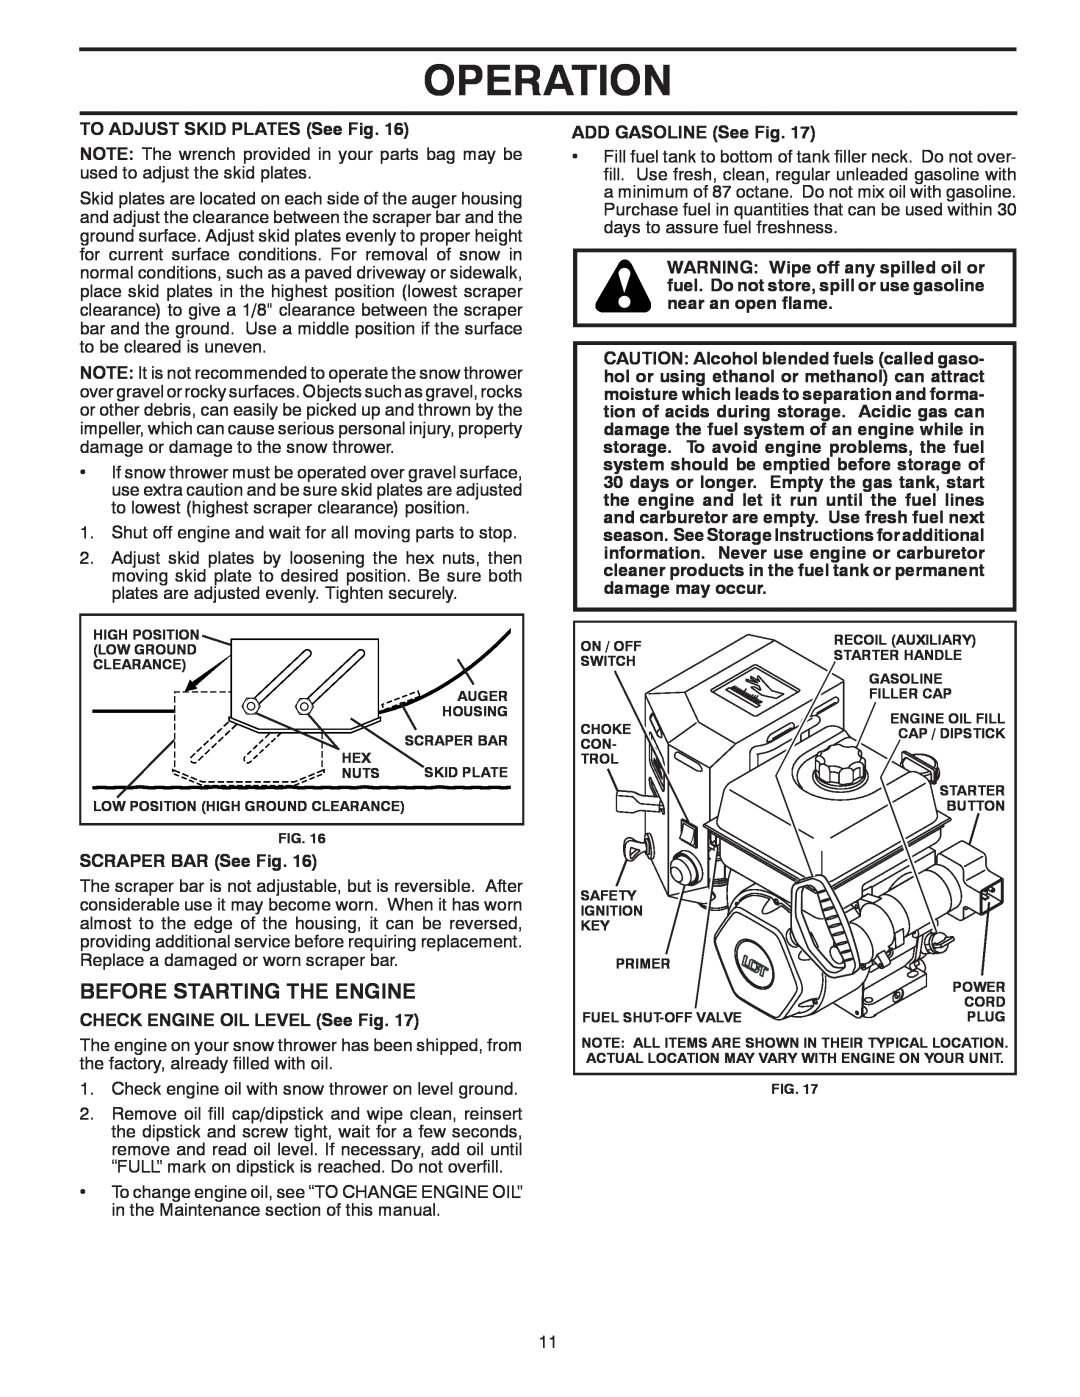 Poulan 96192002901, 428689 Before Starting The Engine, Operation, TO ADJUST SKID PLATES See Fig, SCRAPER BAR See Fig 